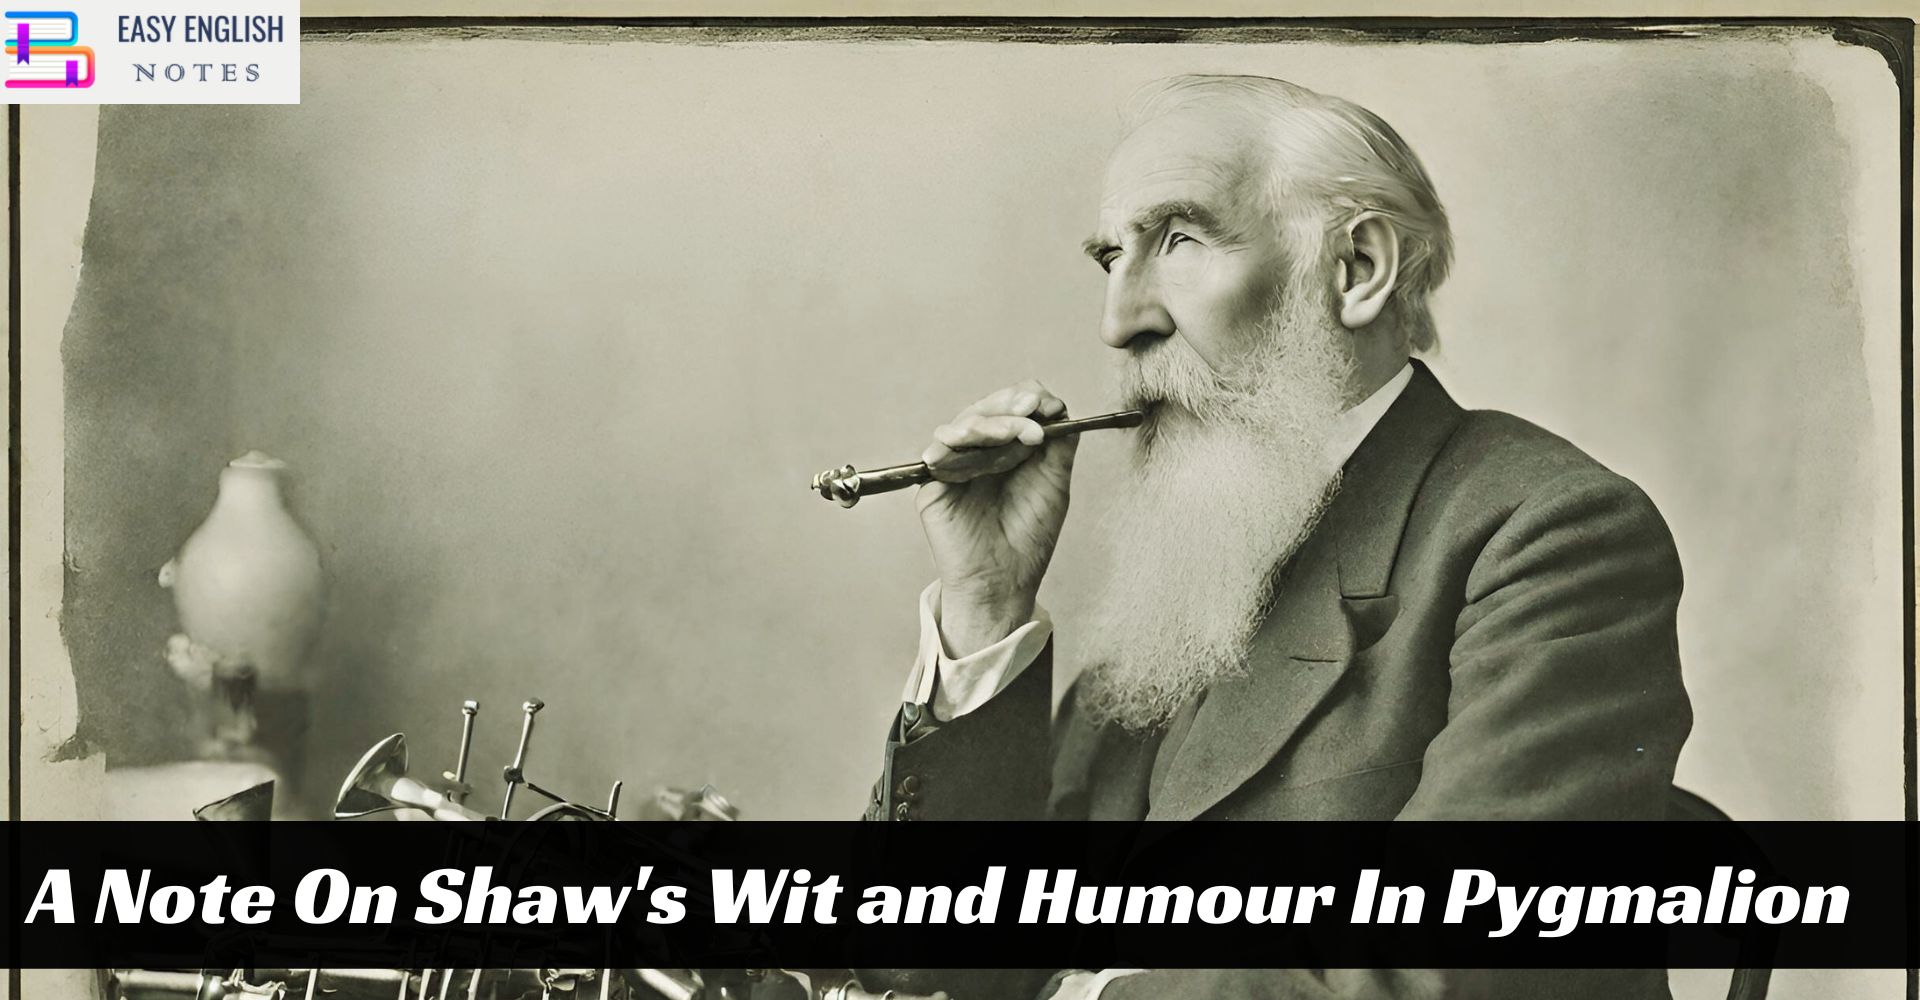 A Note On Shaw's Wit and Humour In Pygmalion